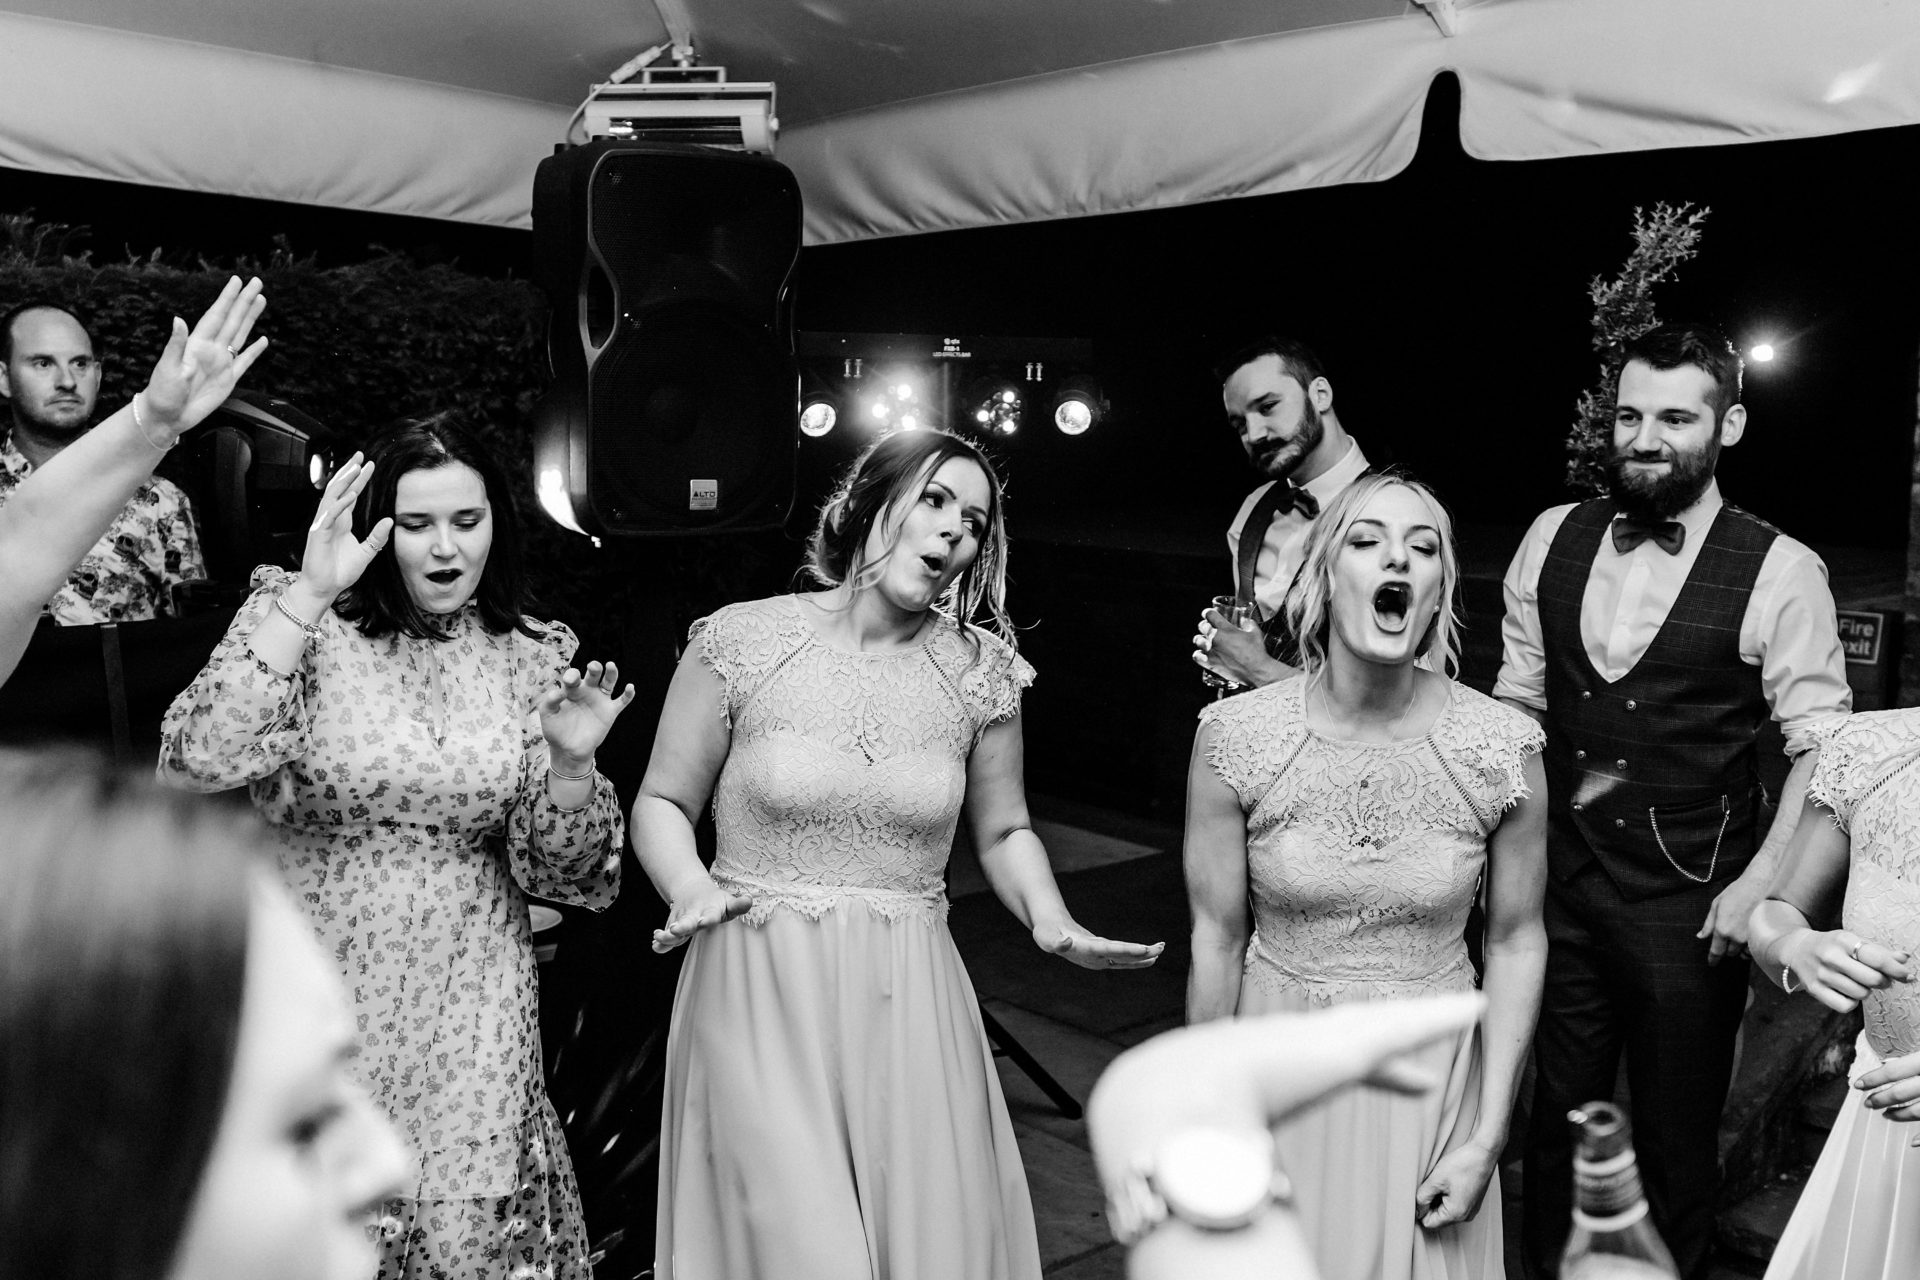 dancing at the wedding at saltmarshe hall, howden, east yorkshire